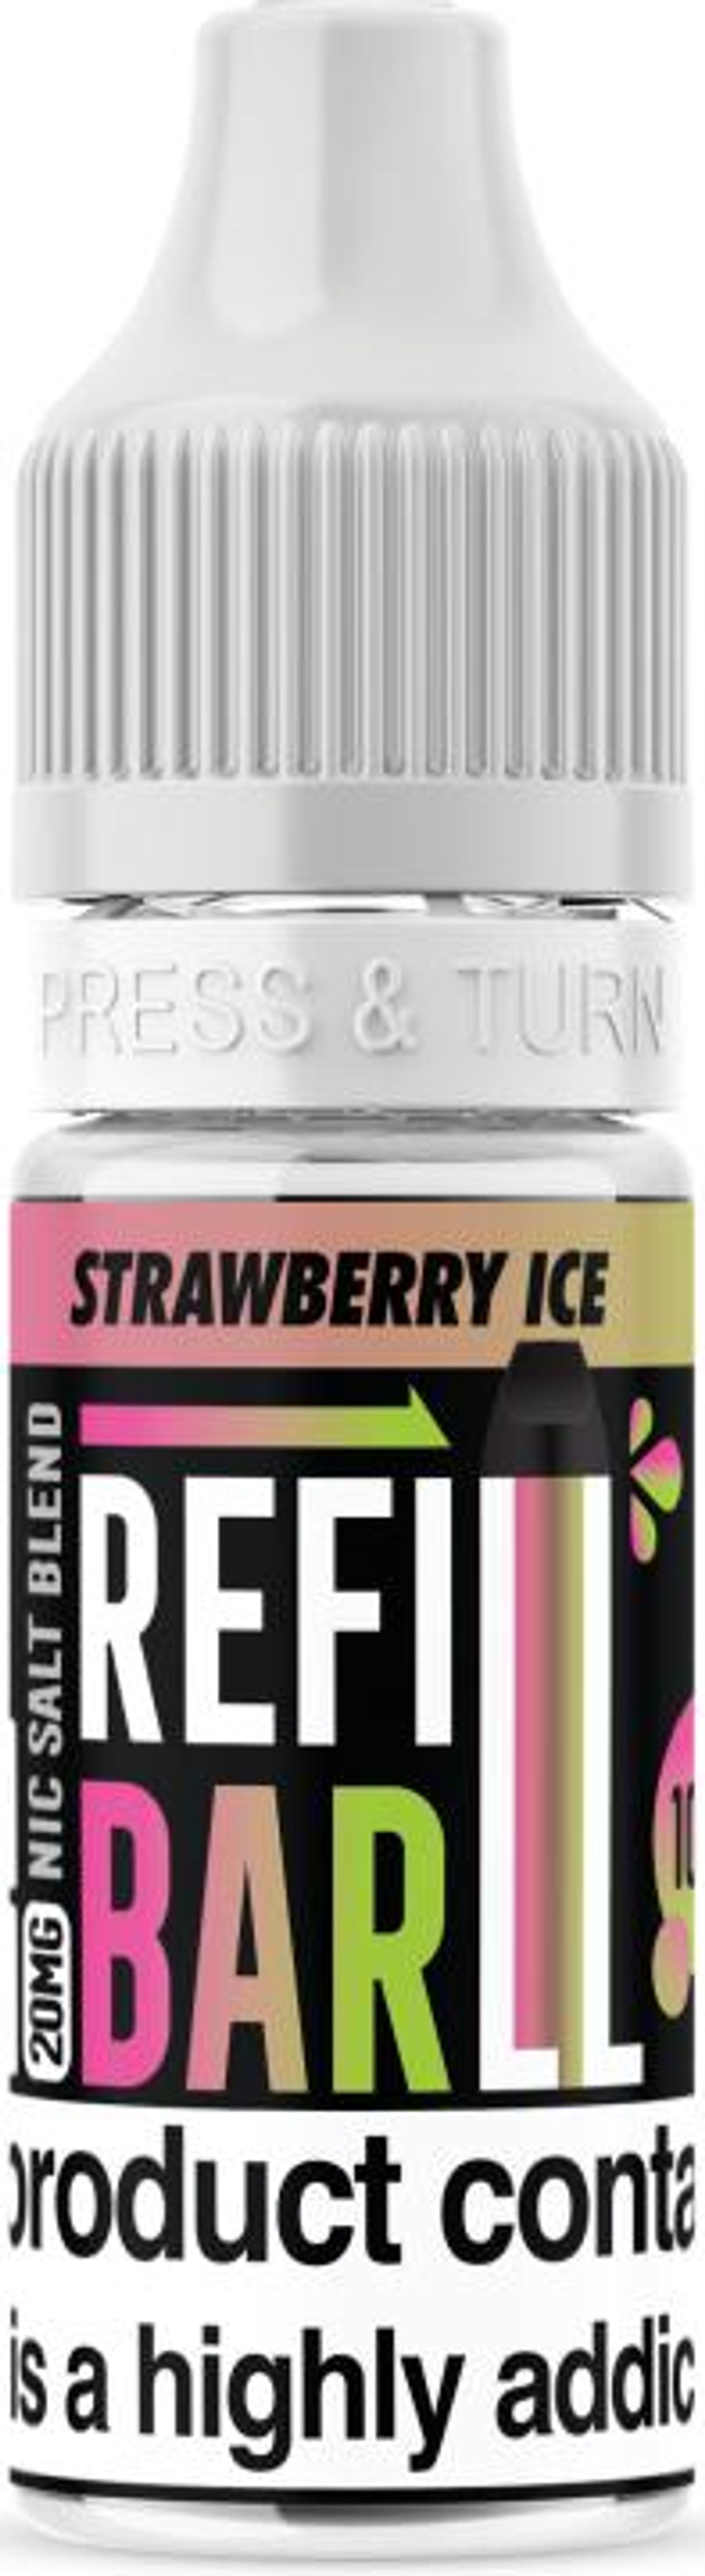 Image of Strawberry Ice by Refill Bar Salts